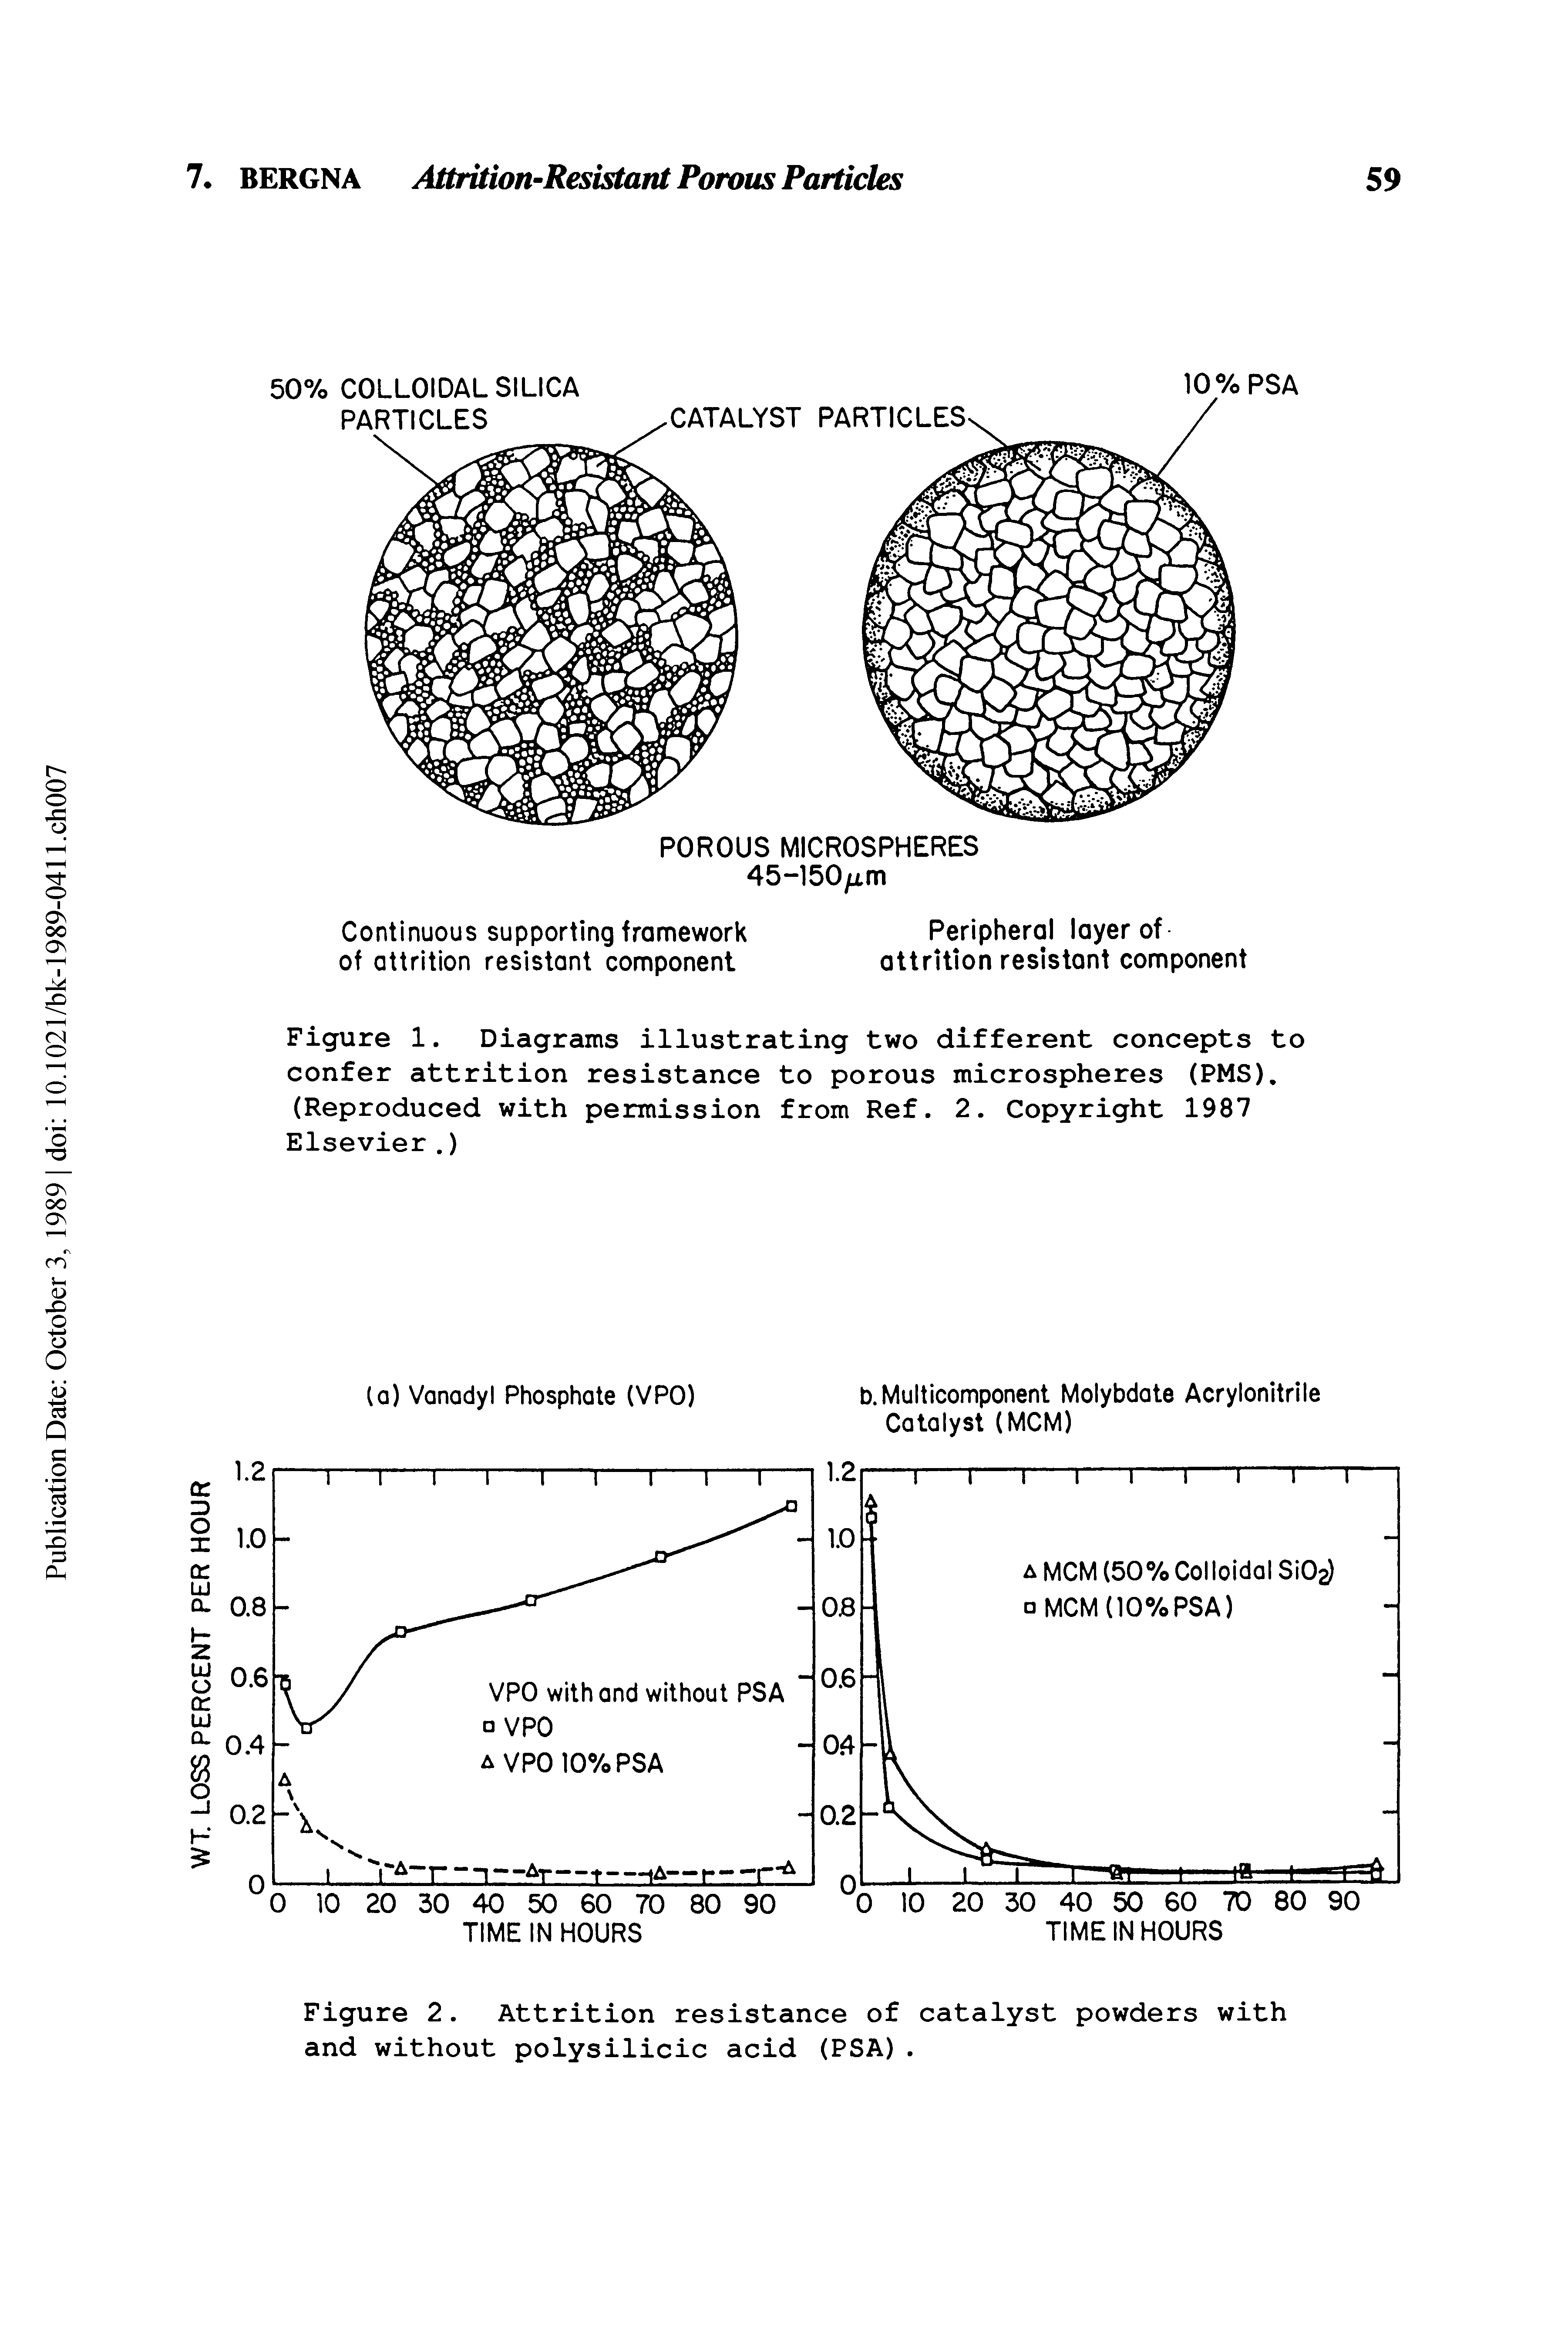 Figure 1. Diagrams illustrating two different concepts to confer attrition resistance to porous microspheres (PMS). (Reproduced with permission from Ref. 2. Copyright 1987 Elsevier. )...